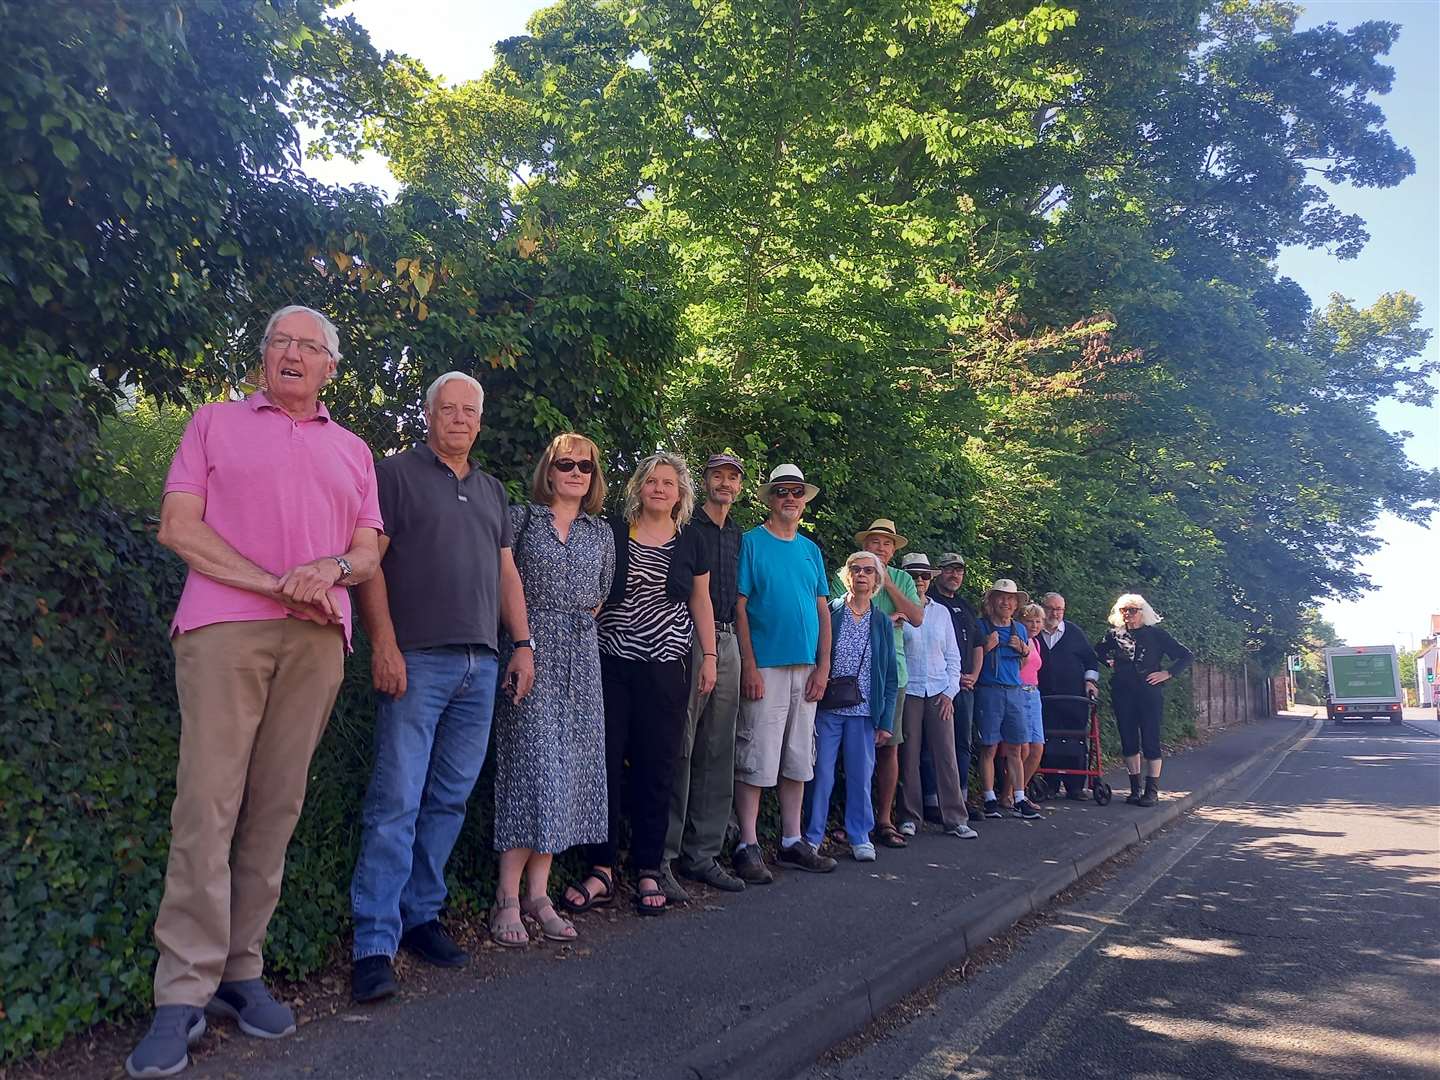 Residents in the Barton ward are pleased with the council's decision to protect the trees